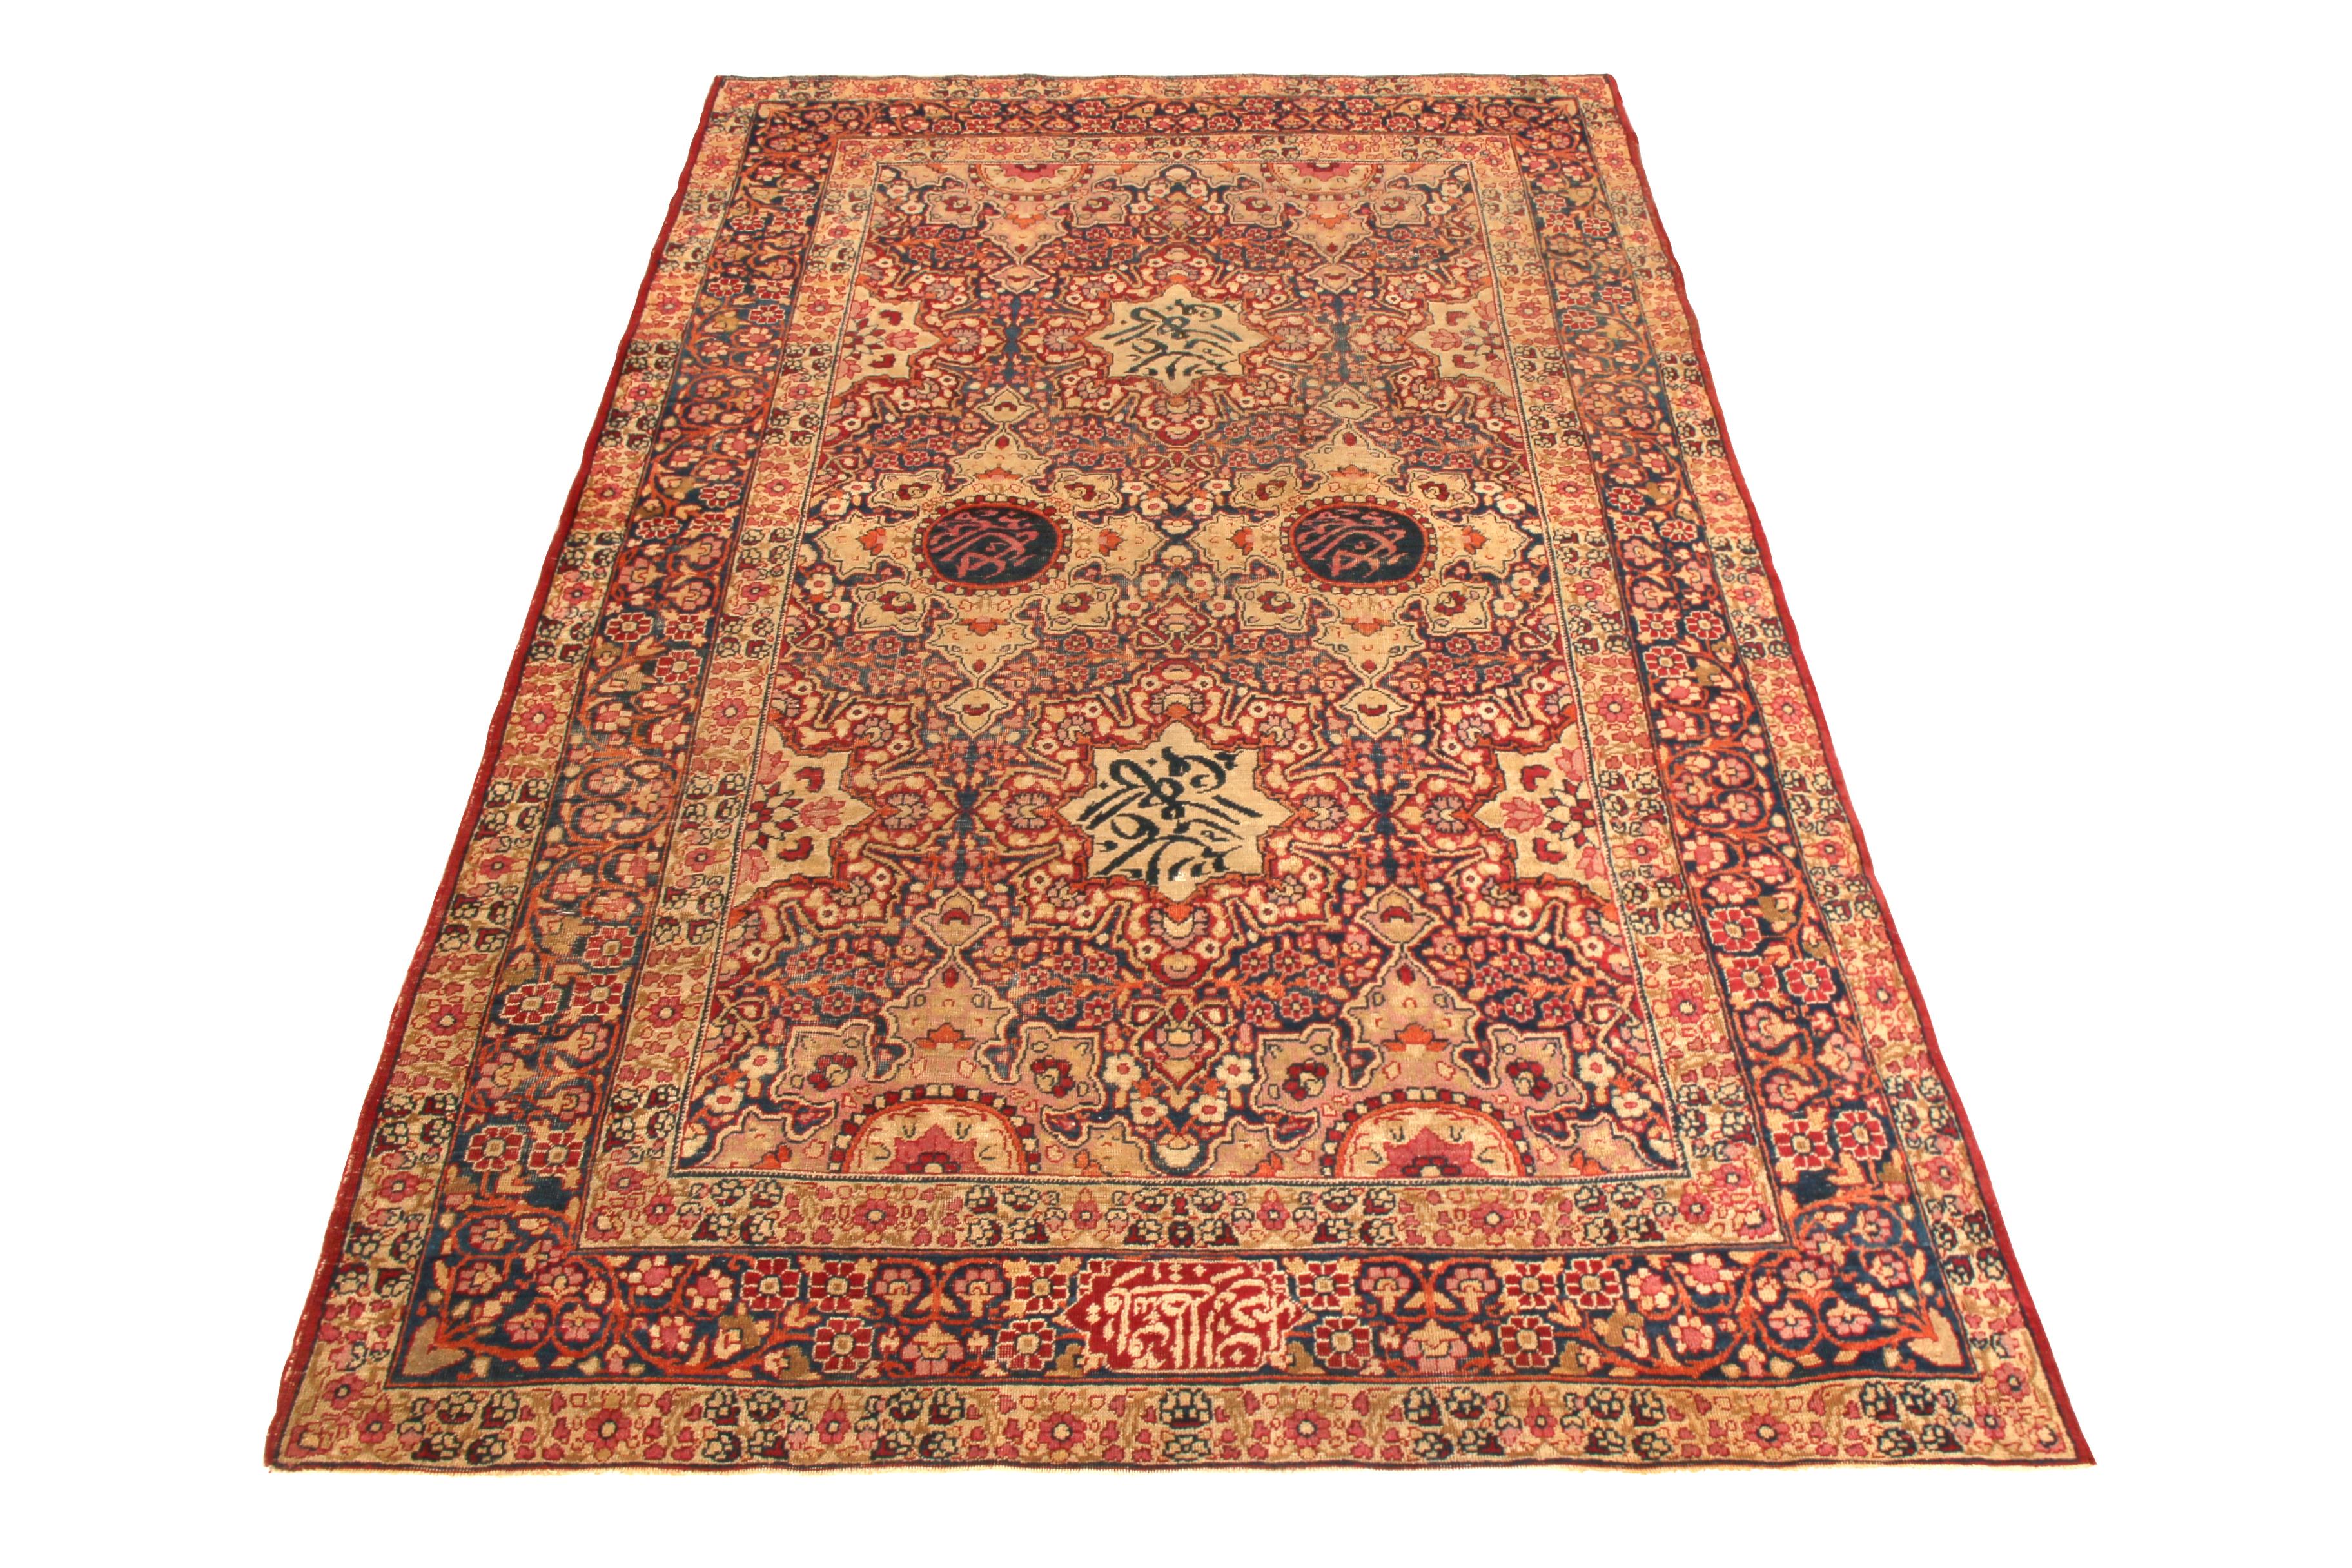 Hand knotted in wool originating circa 1890-1900, this antique Persian rug, whose origins lie in the celebrated Kerman Lavar style, has a story all its own. While the traditional medallion design of the Persian rug is vibrant and lively, this wool